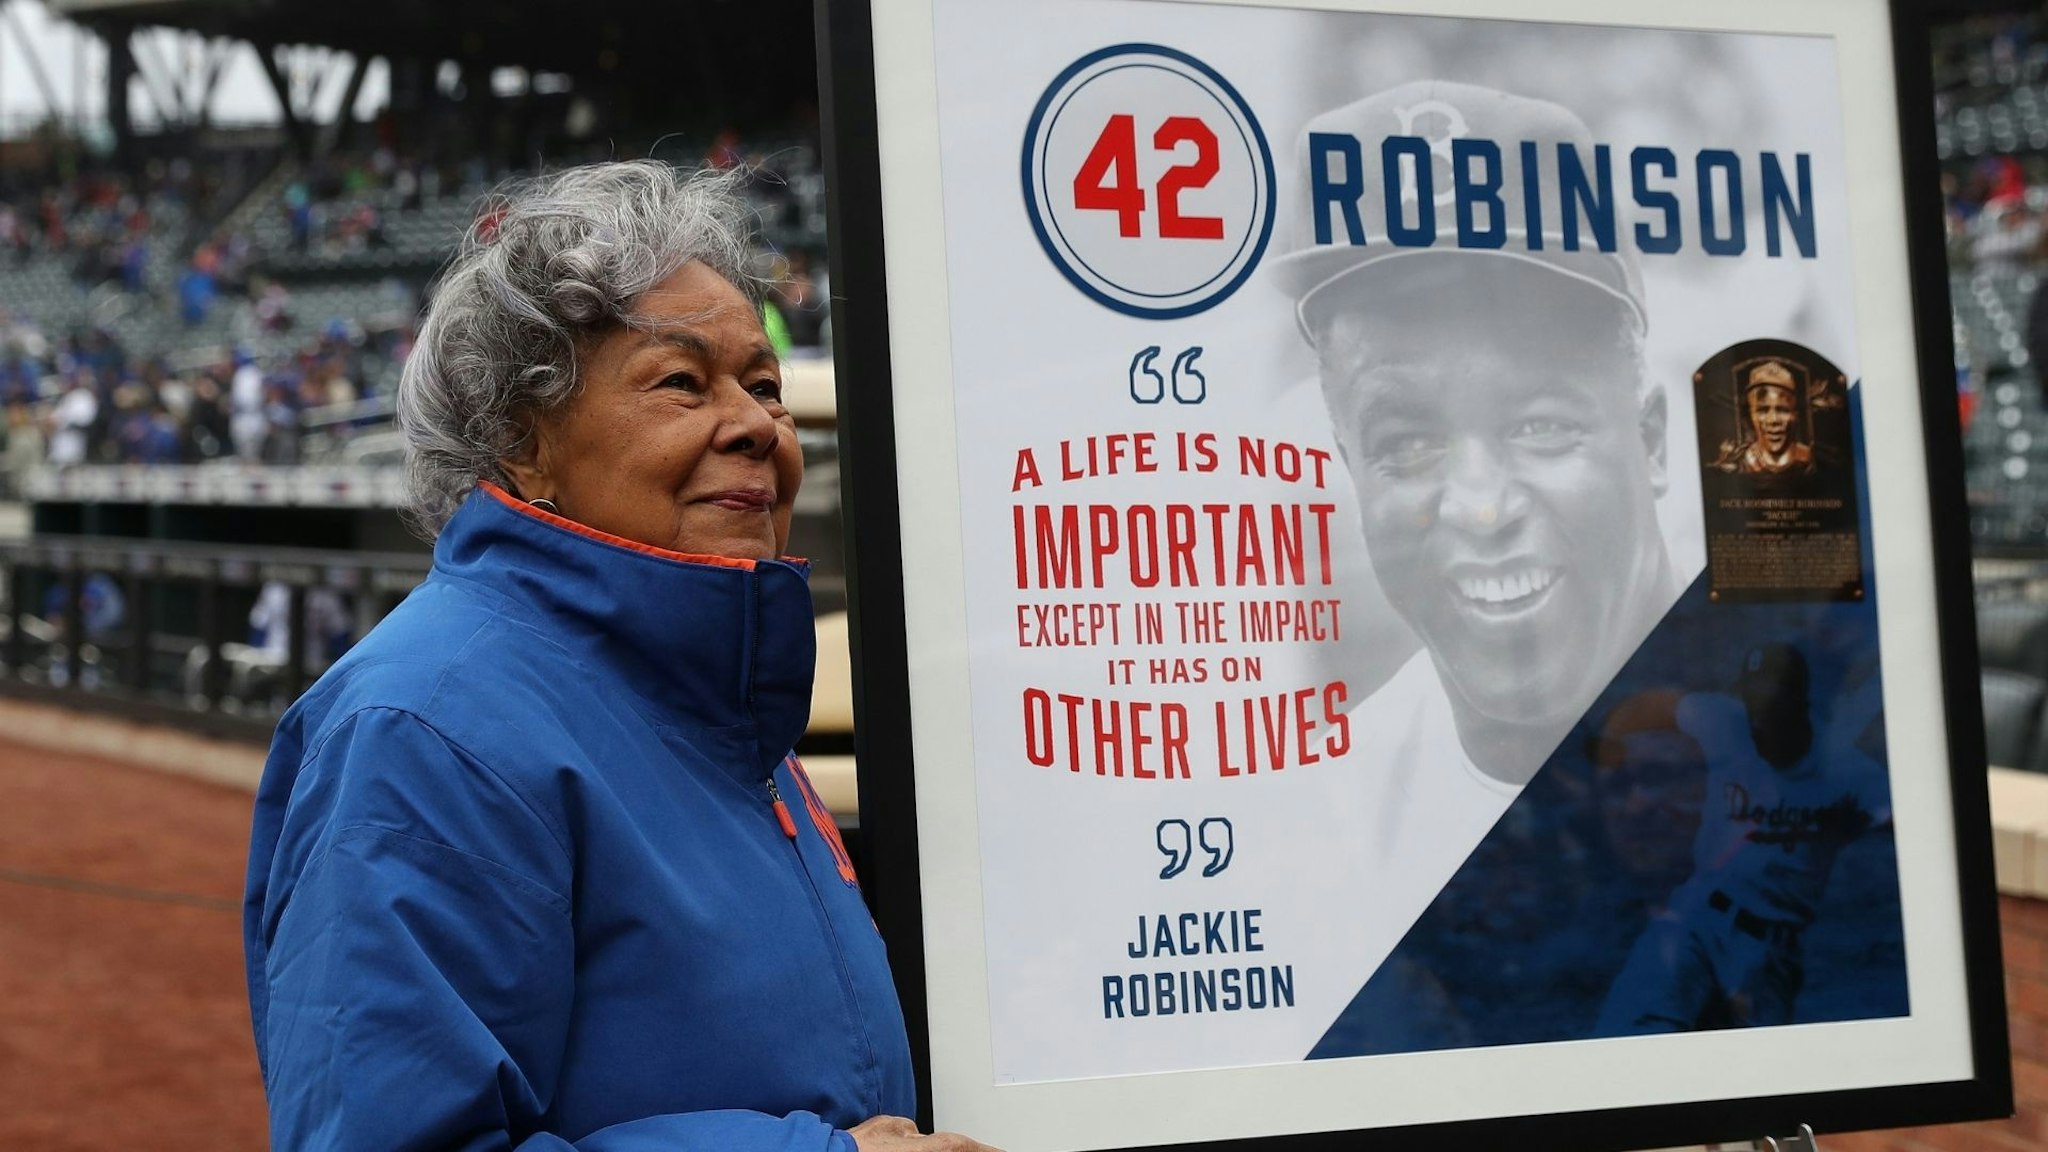 NEW YORK, NY - APRIL 15: Rachel Robinson, widow of Baseball player Jackie Robinson stands next to a mural of her late husband before the New York Mets play their game against the Milwaukee Brewers at Citi Field on April 15, 2018 in New York City. All players are wearing #42 in honor of Jackie Robinson Day.